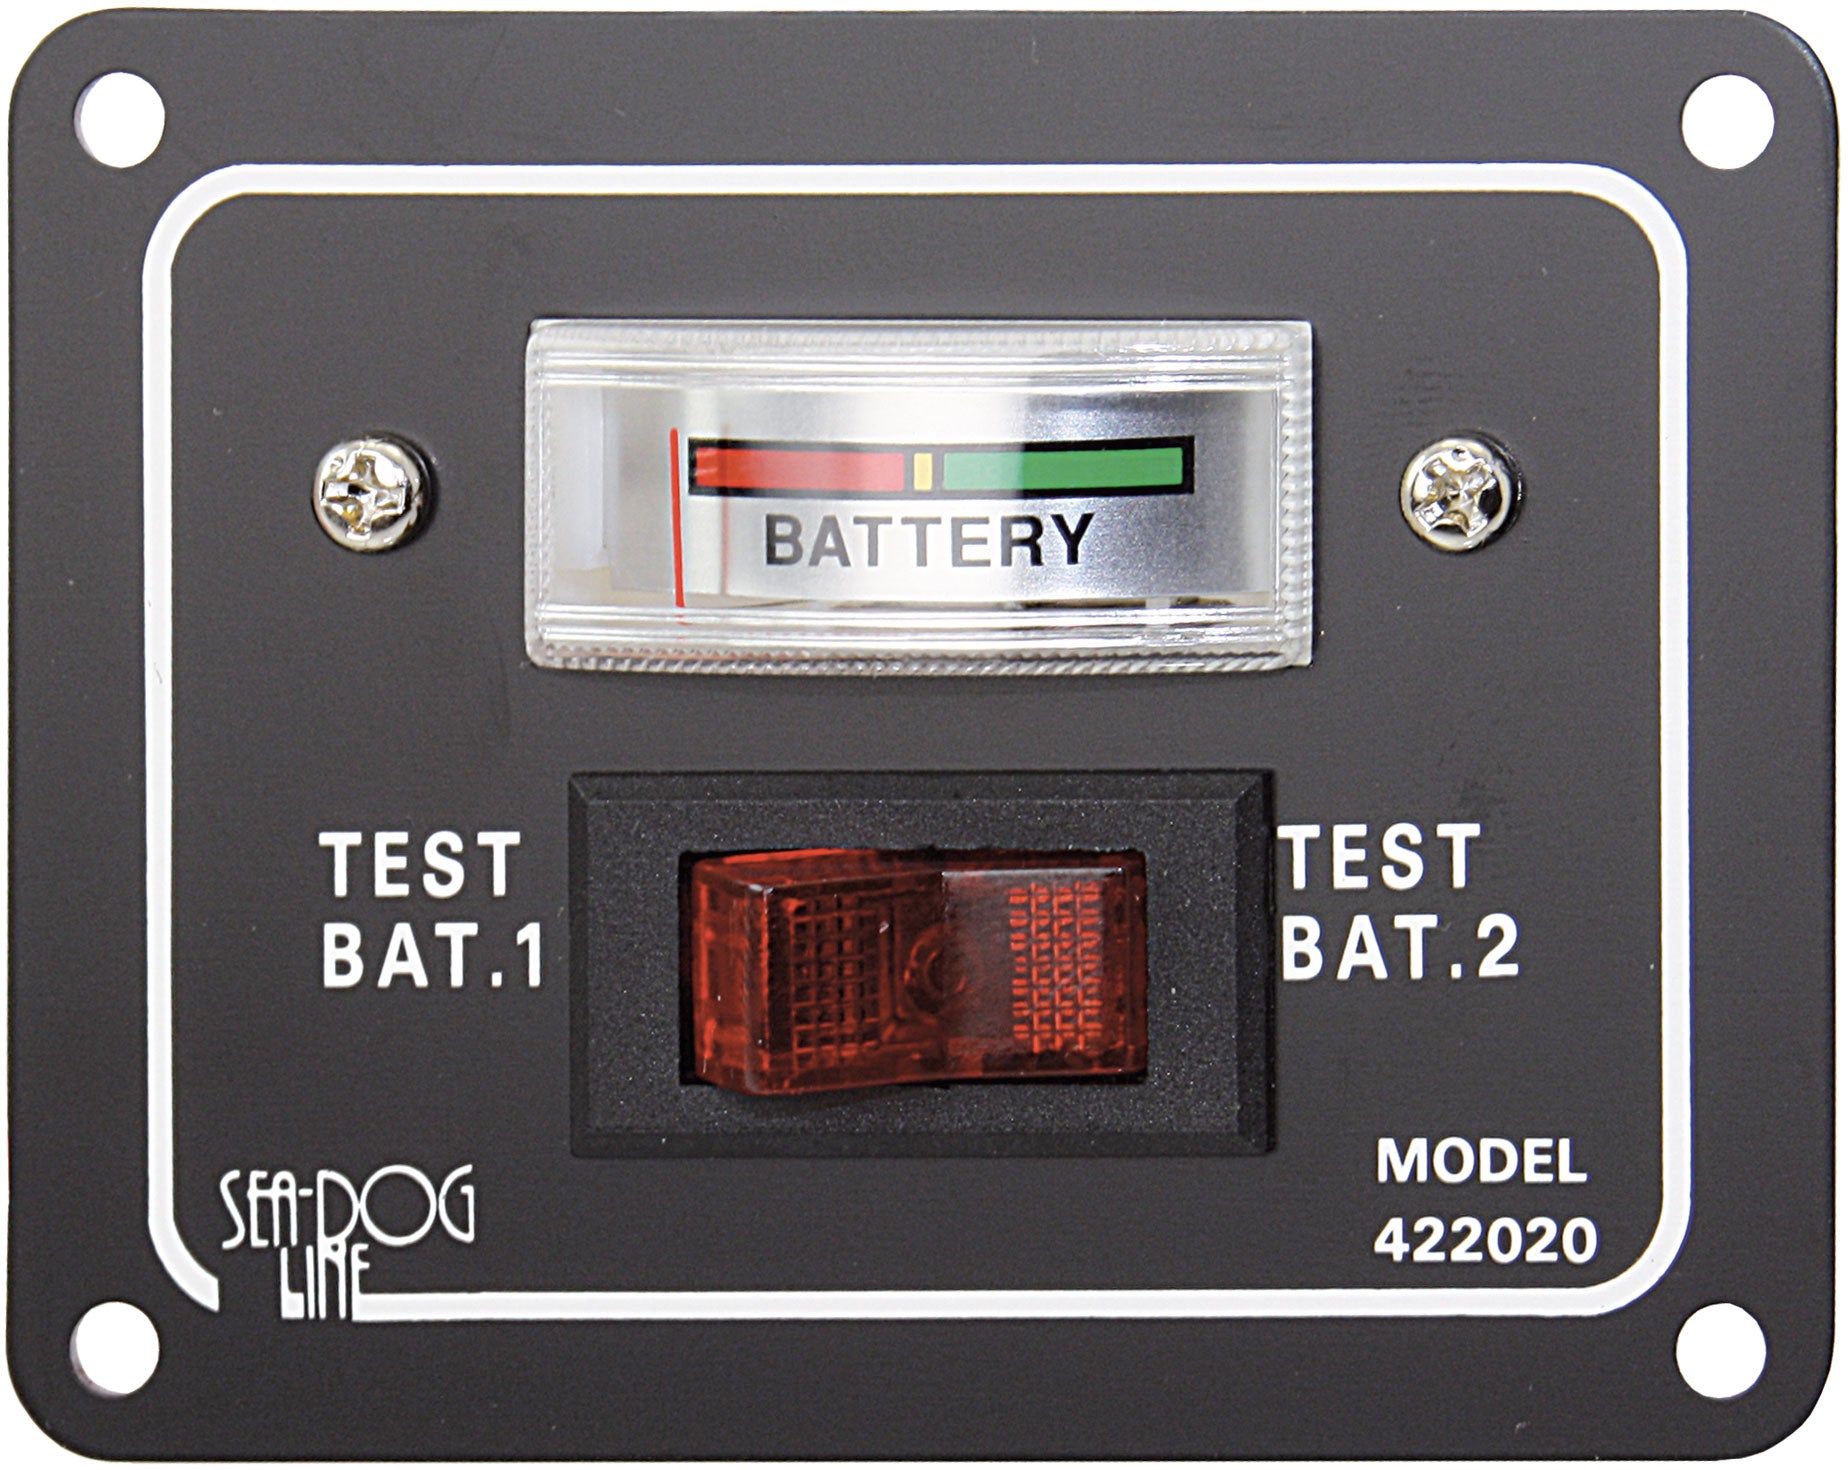 Battery testers